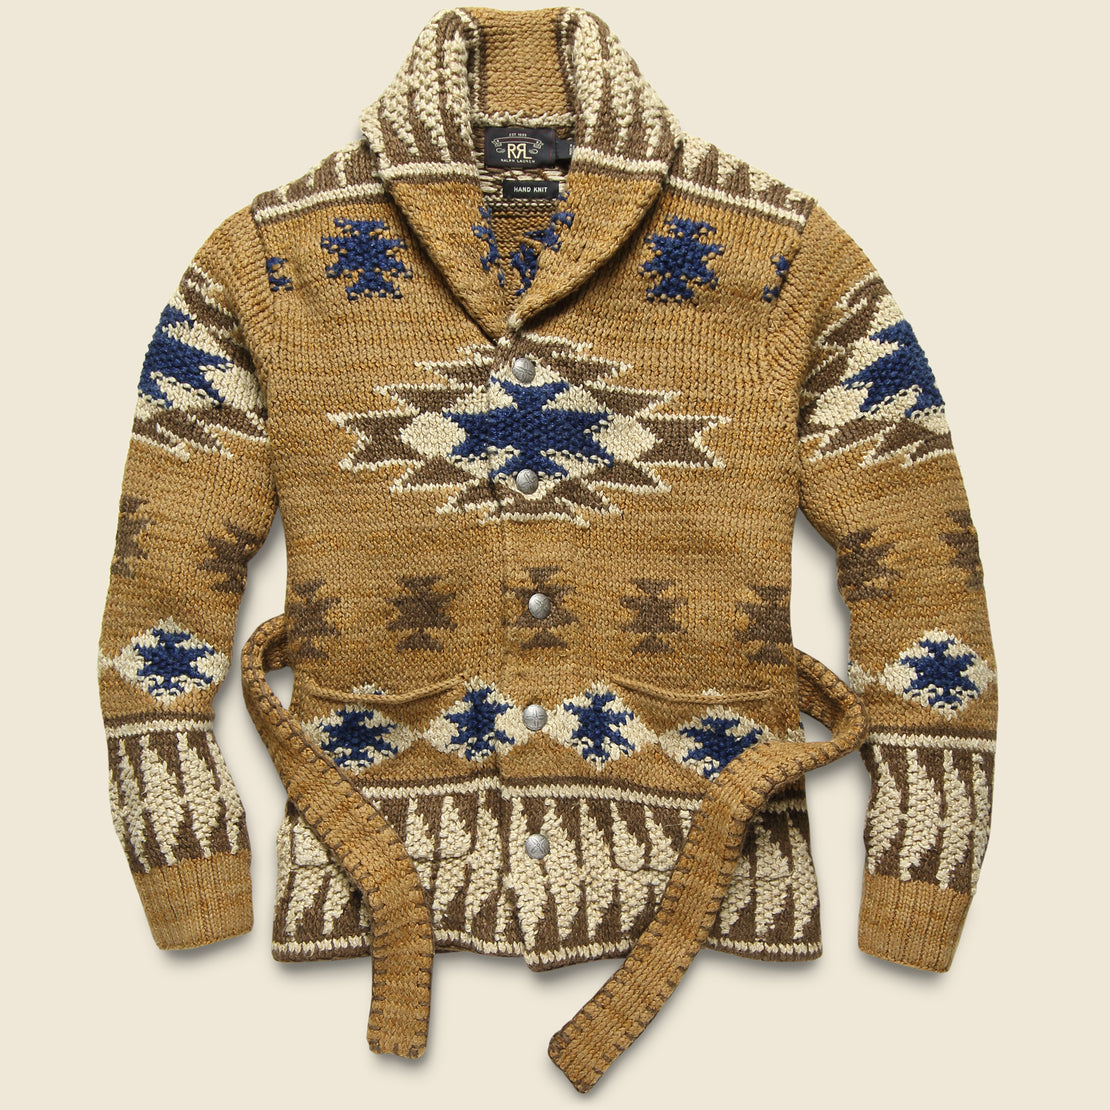 Hand-Knit Ranch Shawl Cardigan - Brown/Indigo - RRL - STAG Provisions - Tops - Sweater